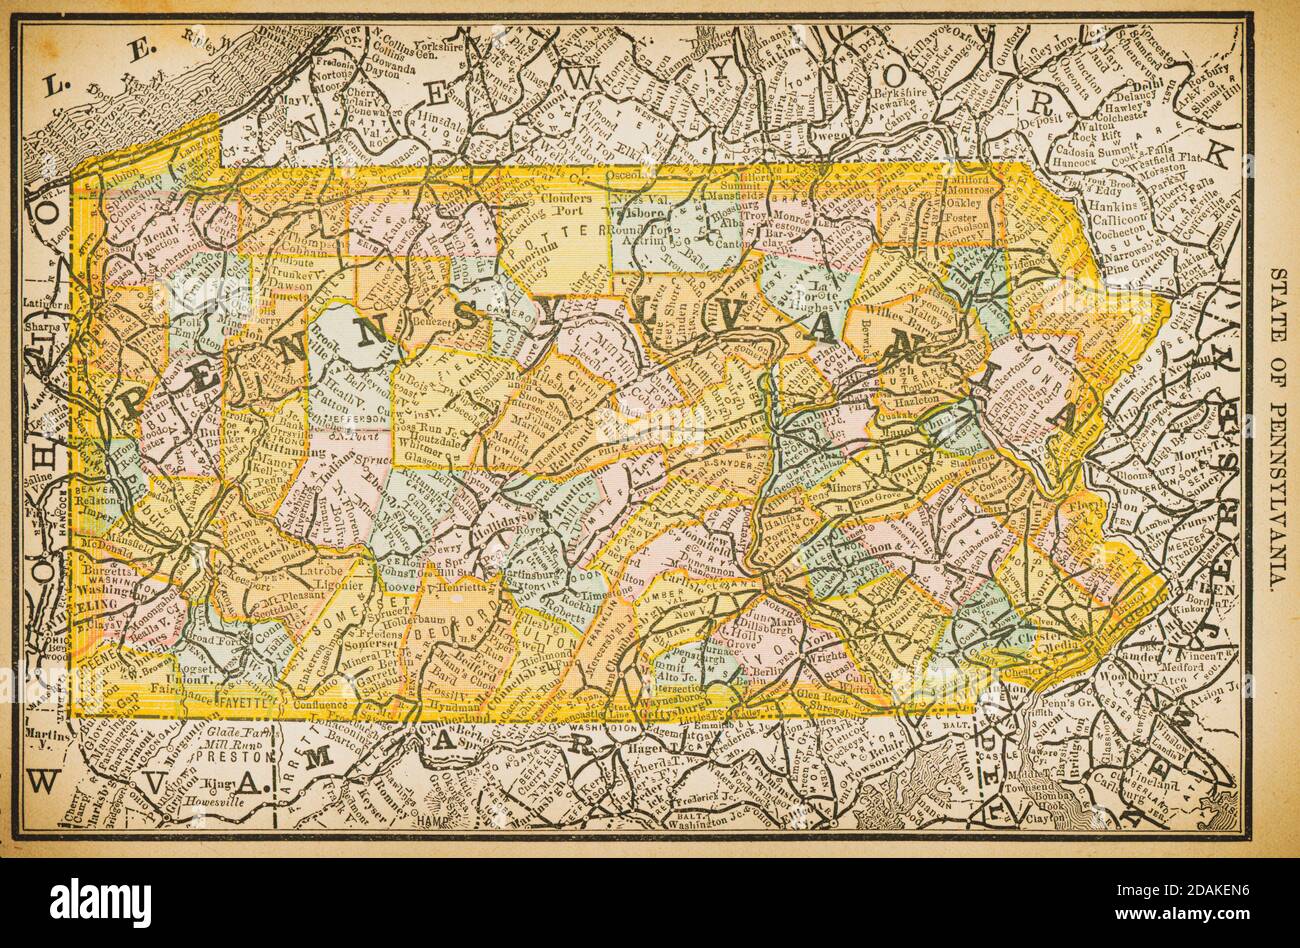 19th century map of Pennsylvania.Published in New Dollar Atlas of the United States and Dominion of Canada. (Rand McNally & Co's, Chicago, 1884). Stock Photo